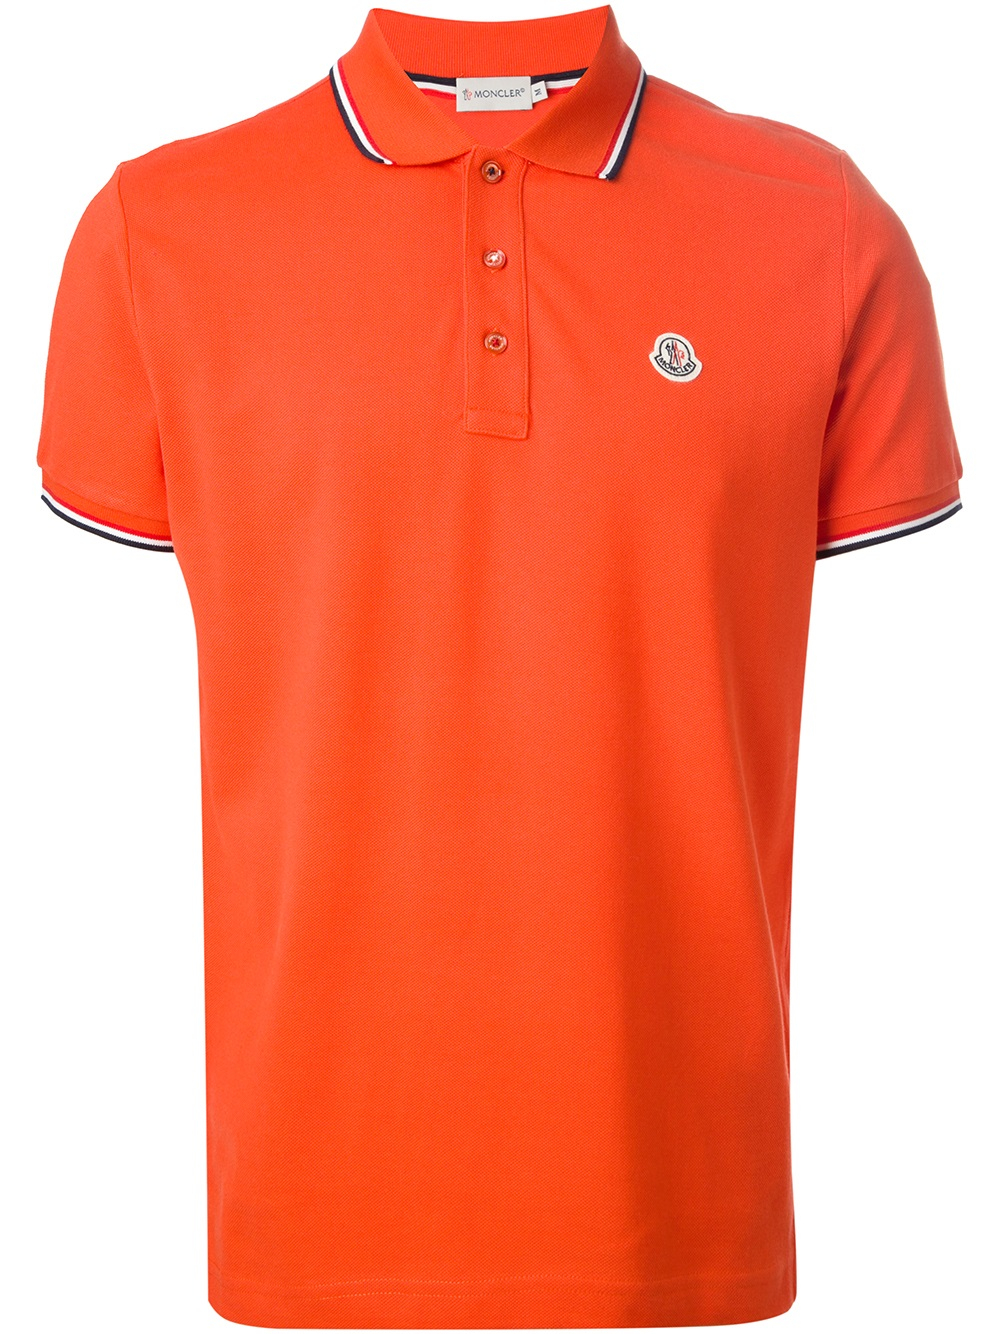 Moncler Red Polo Shirt esw-ecommerce.co.uk